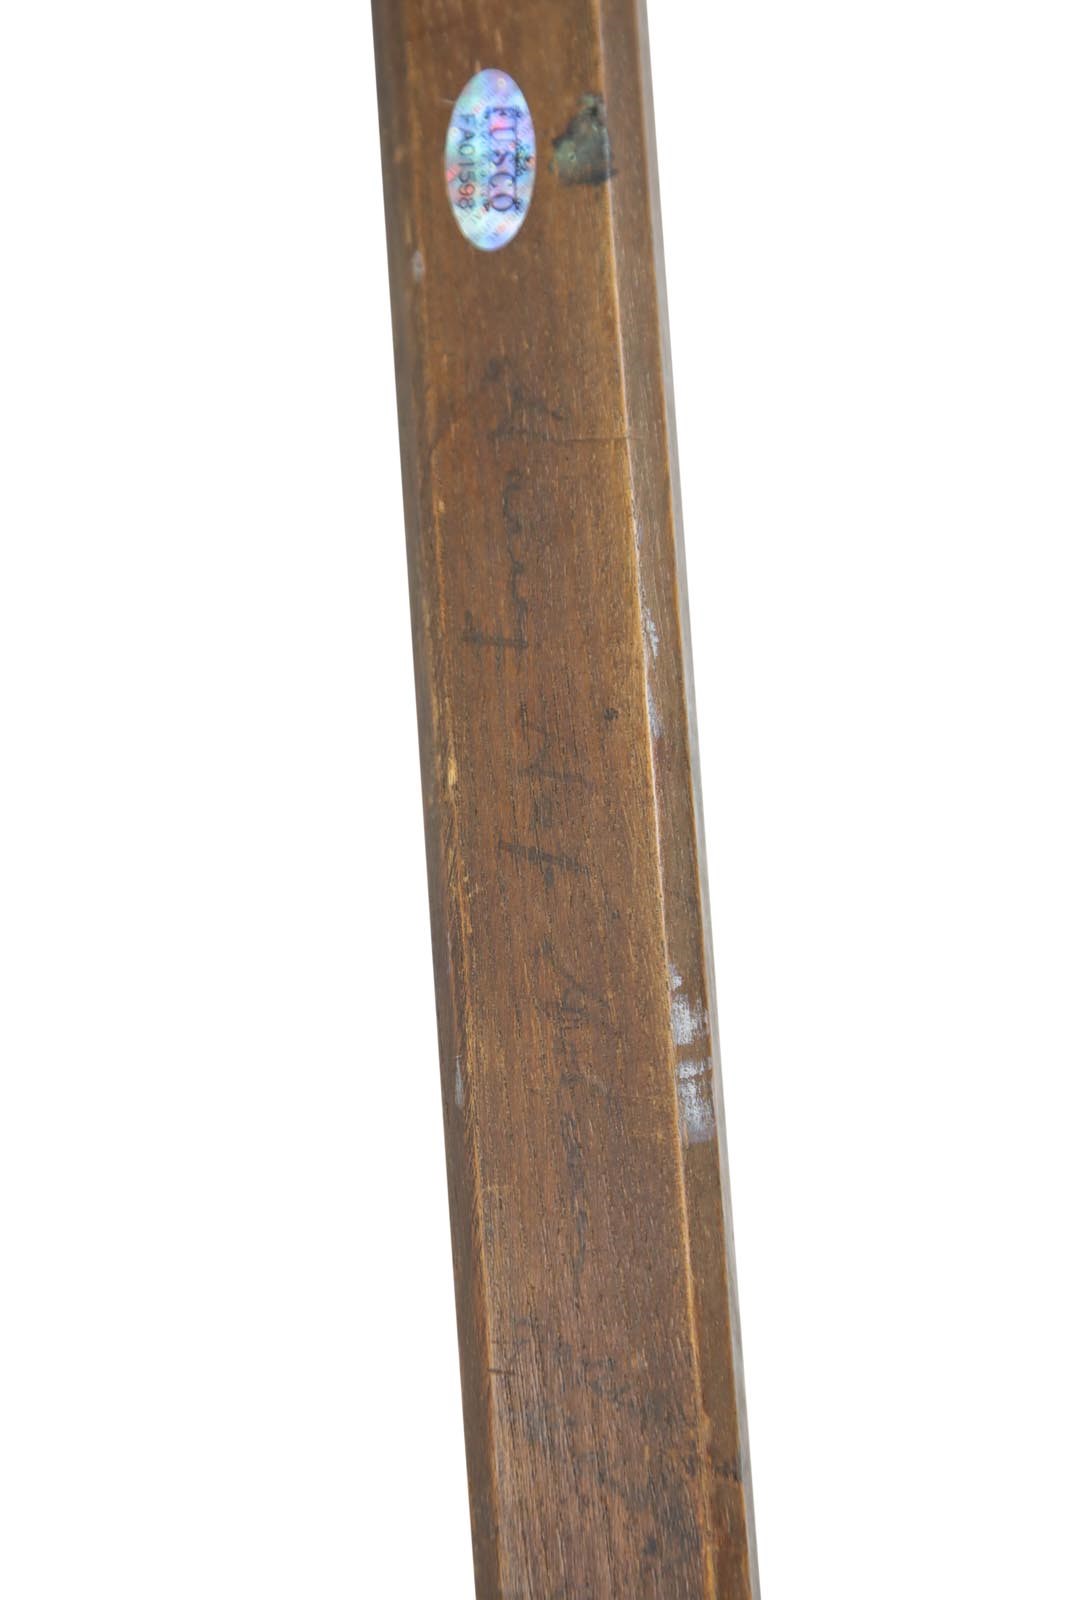 Hockey - 1935-36 Cleveland Falcons Team Signed Stick with Hap Holmes (PSA)